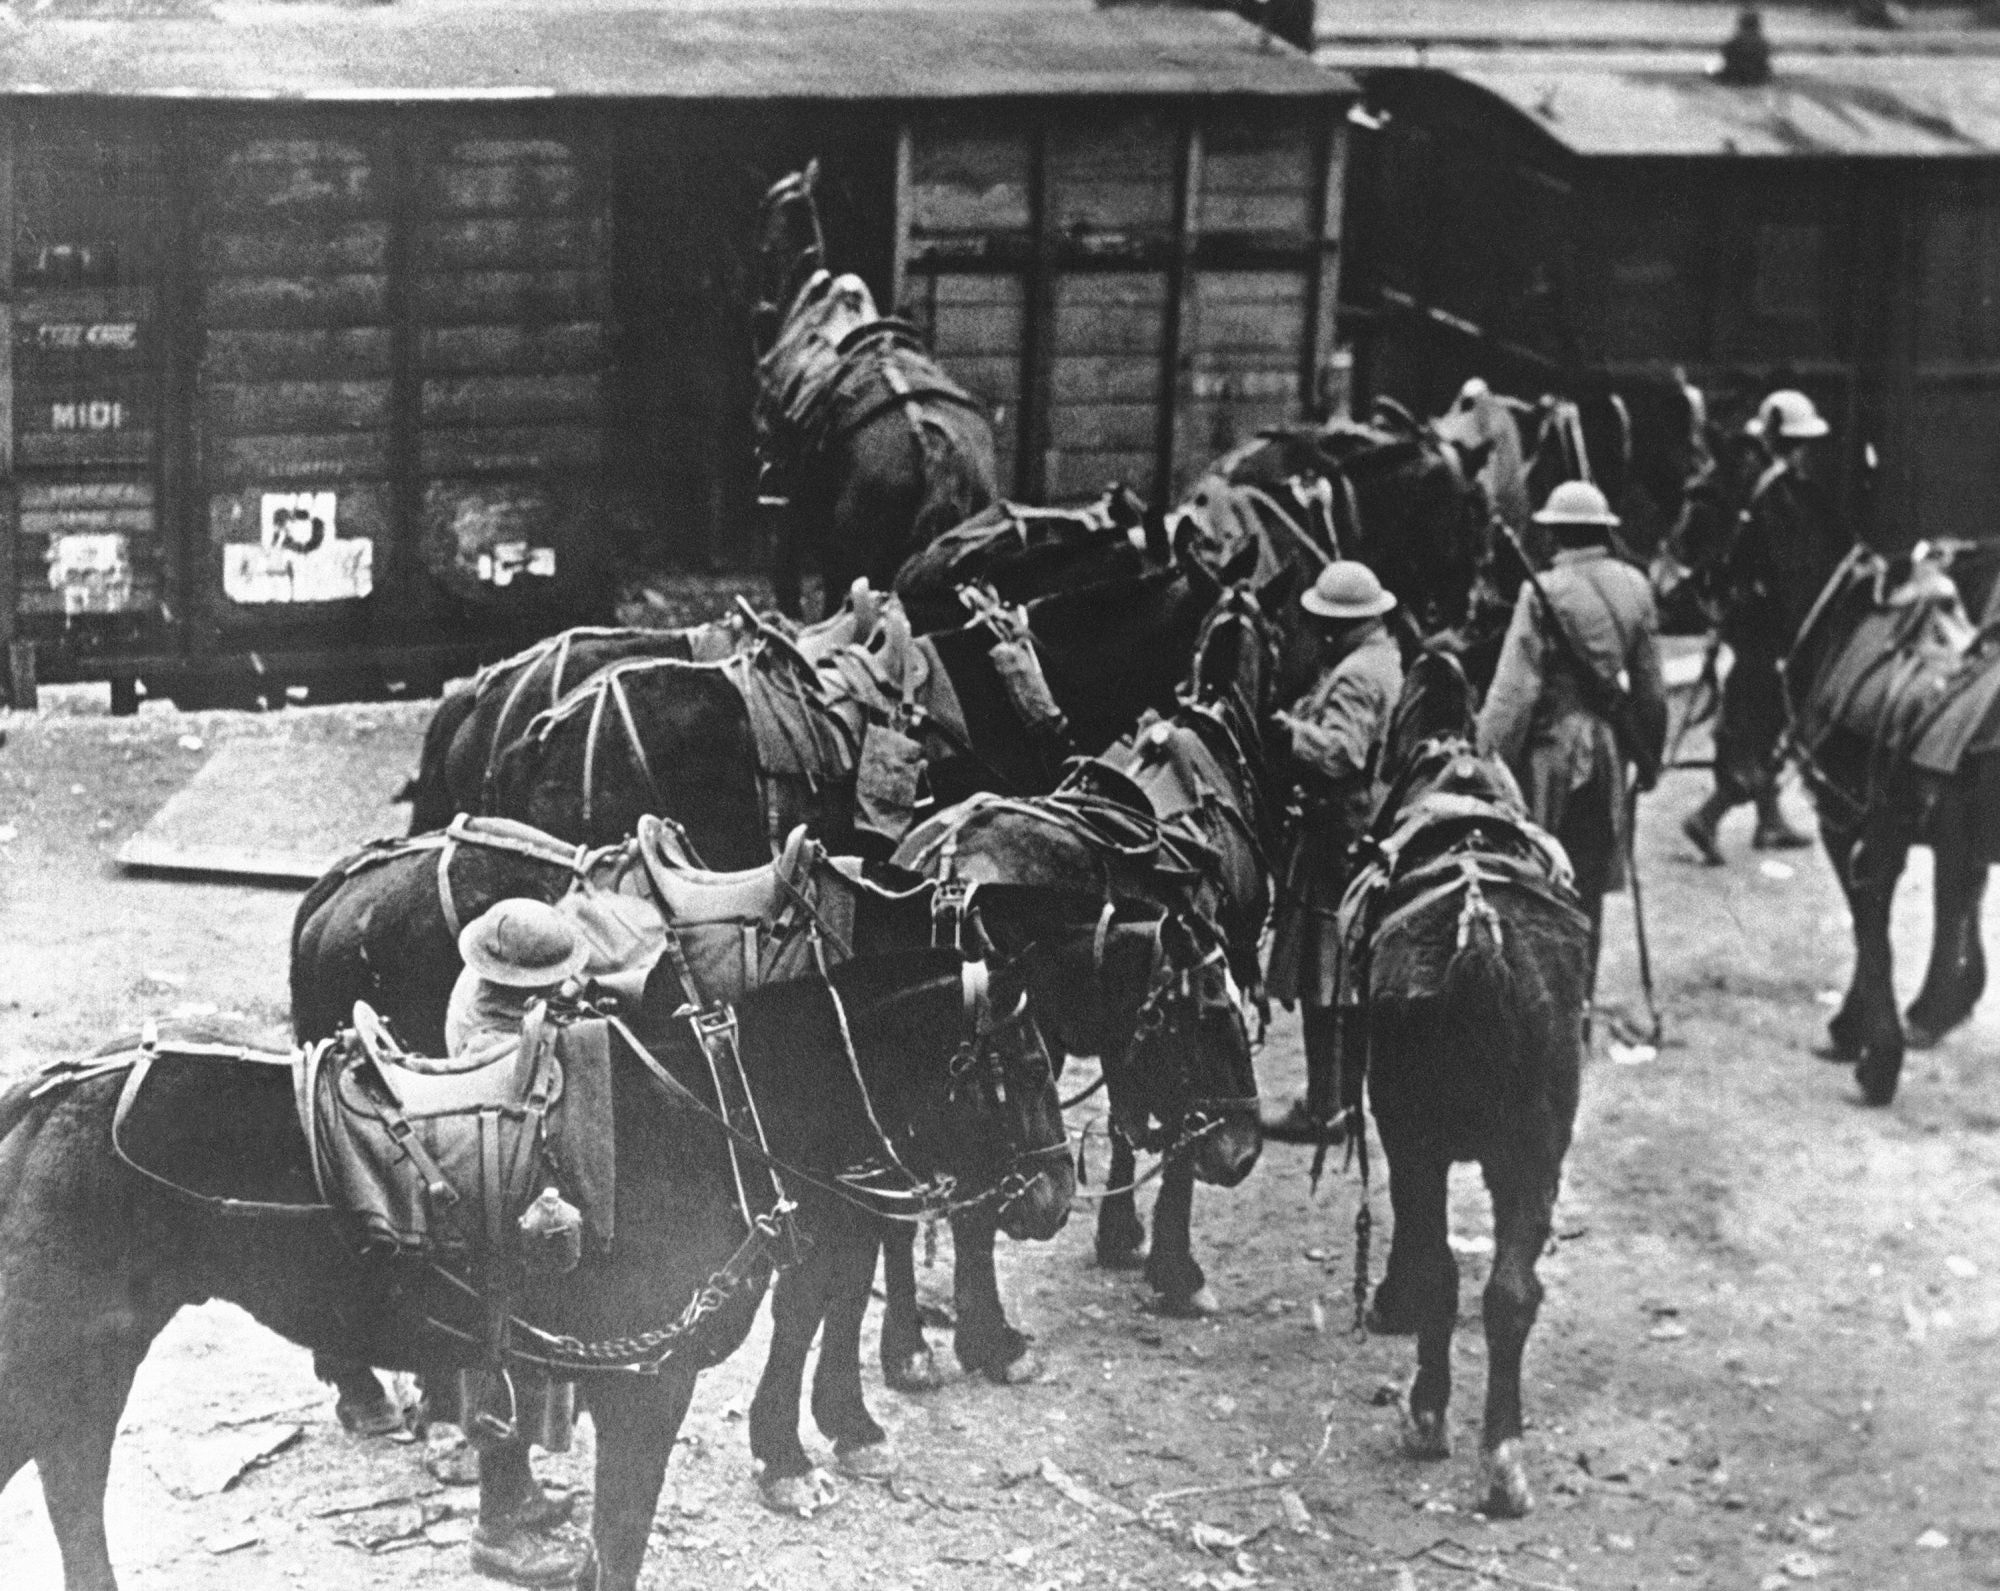 Unsung heroes, animals were vital part of WWI war machine - WHYY